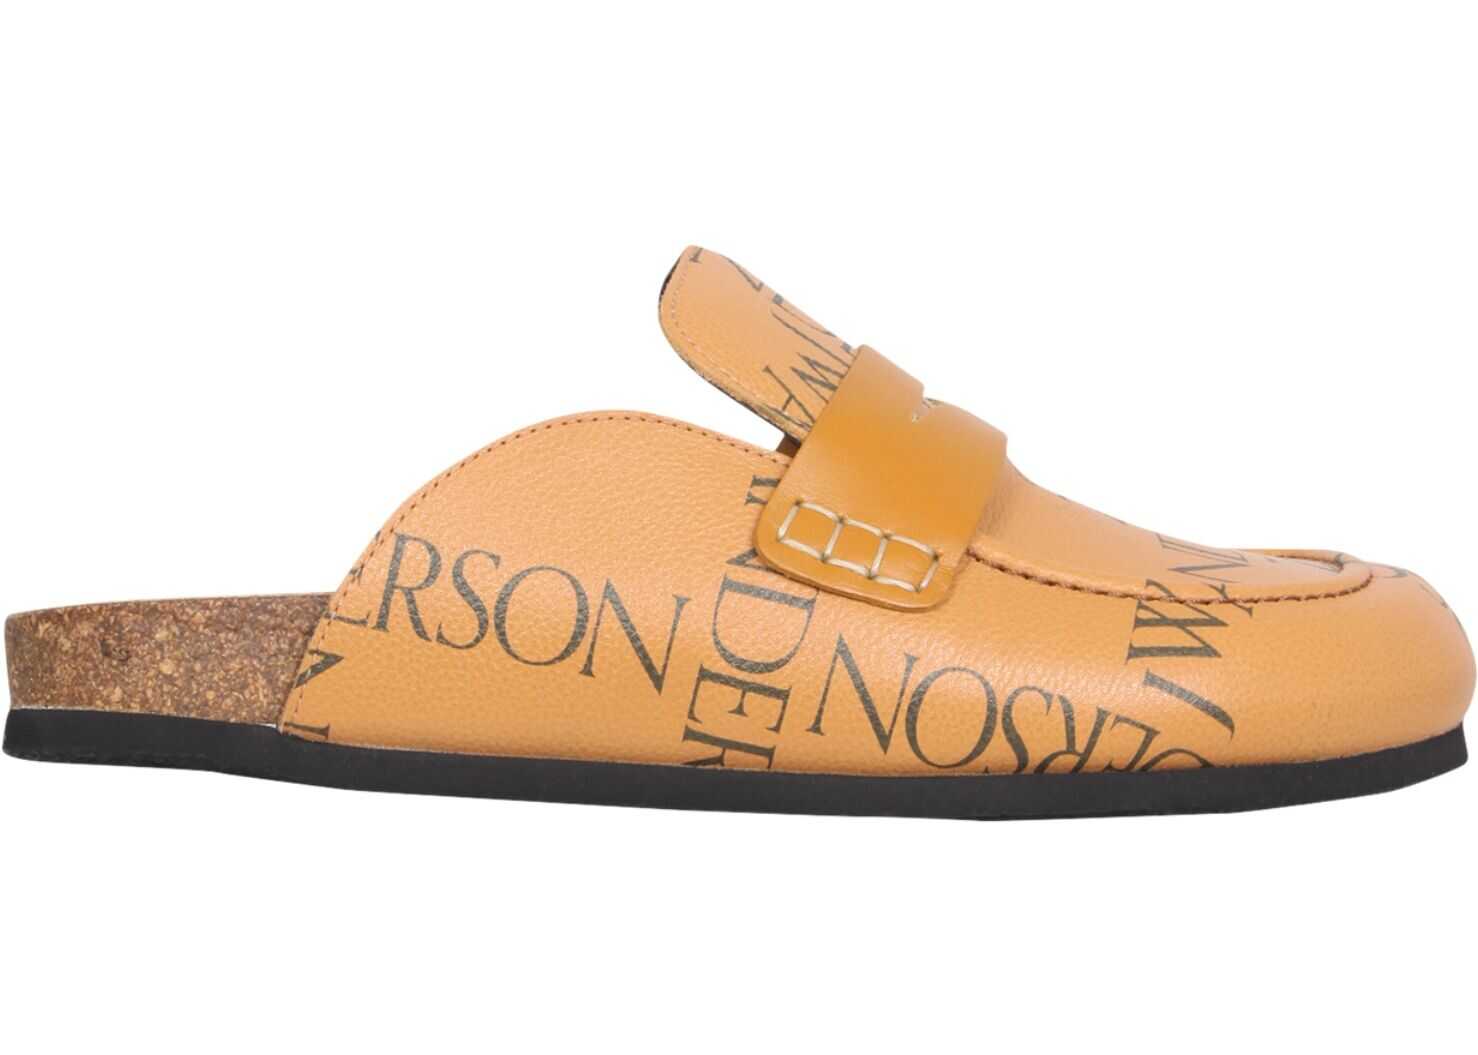 JW Anderson Leather Mules YELLOW image0